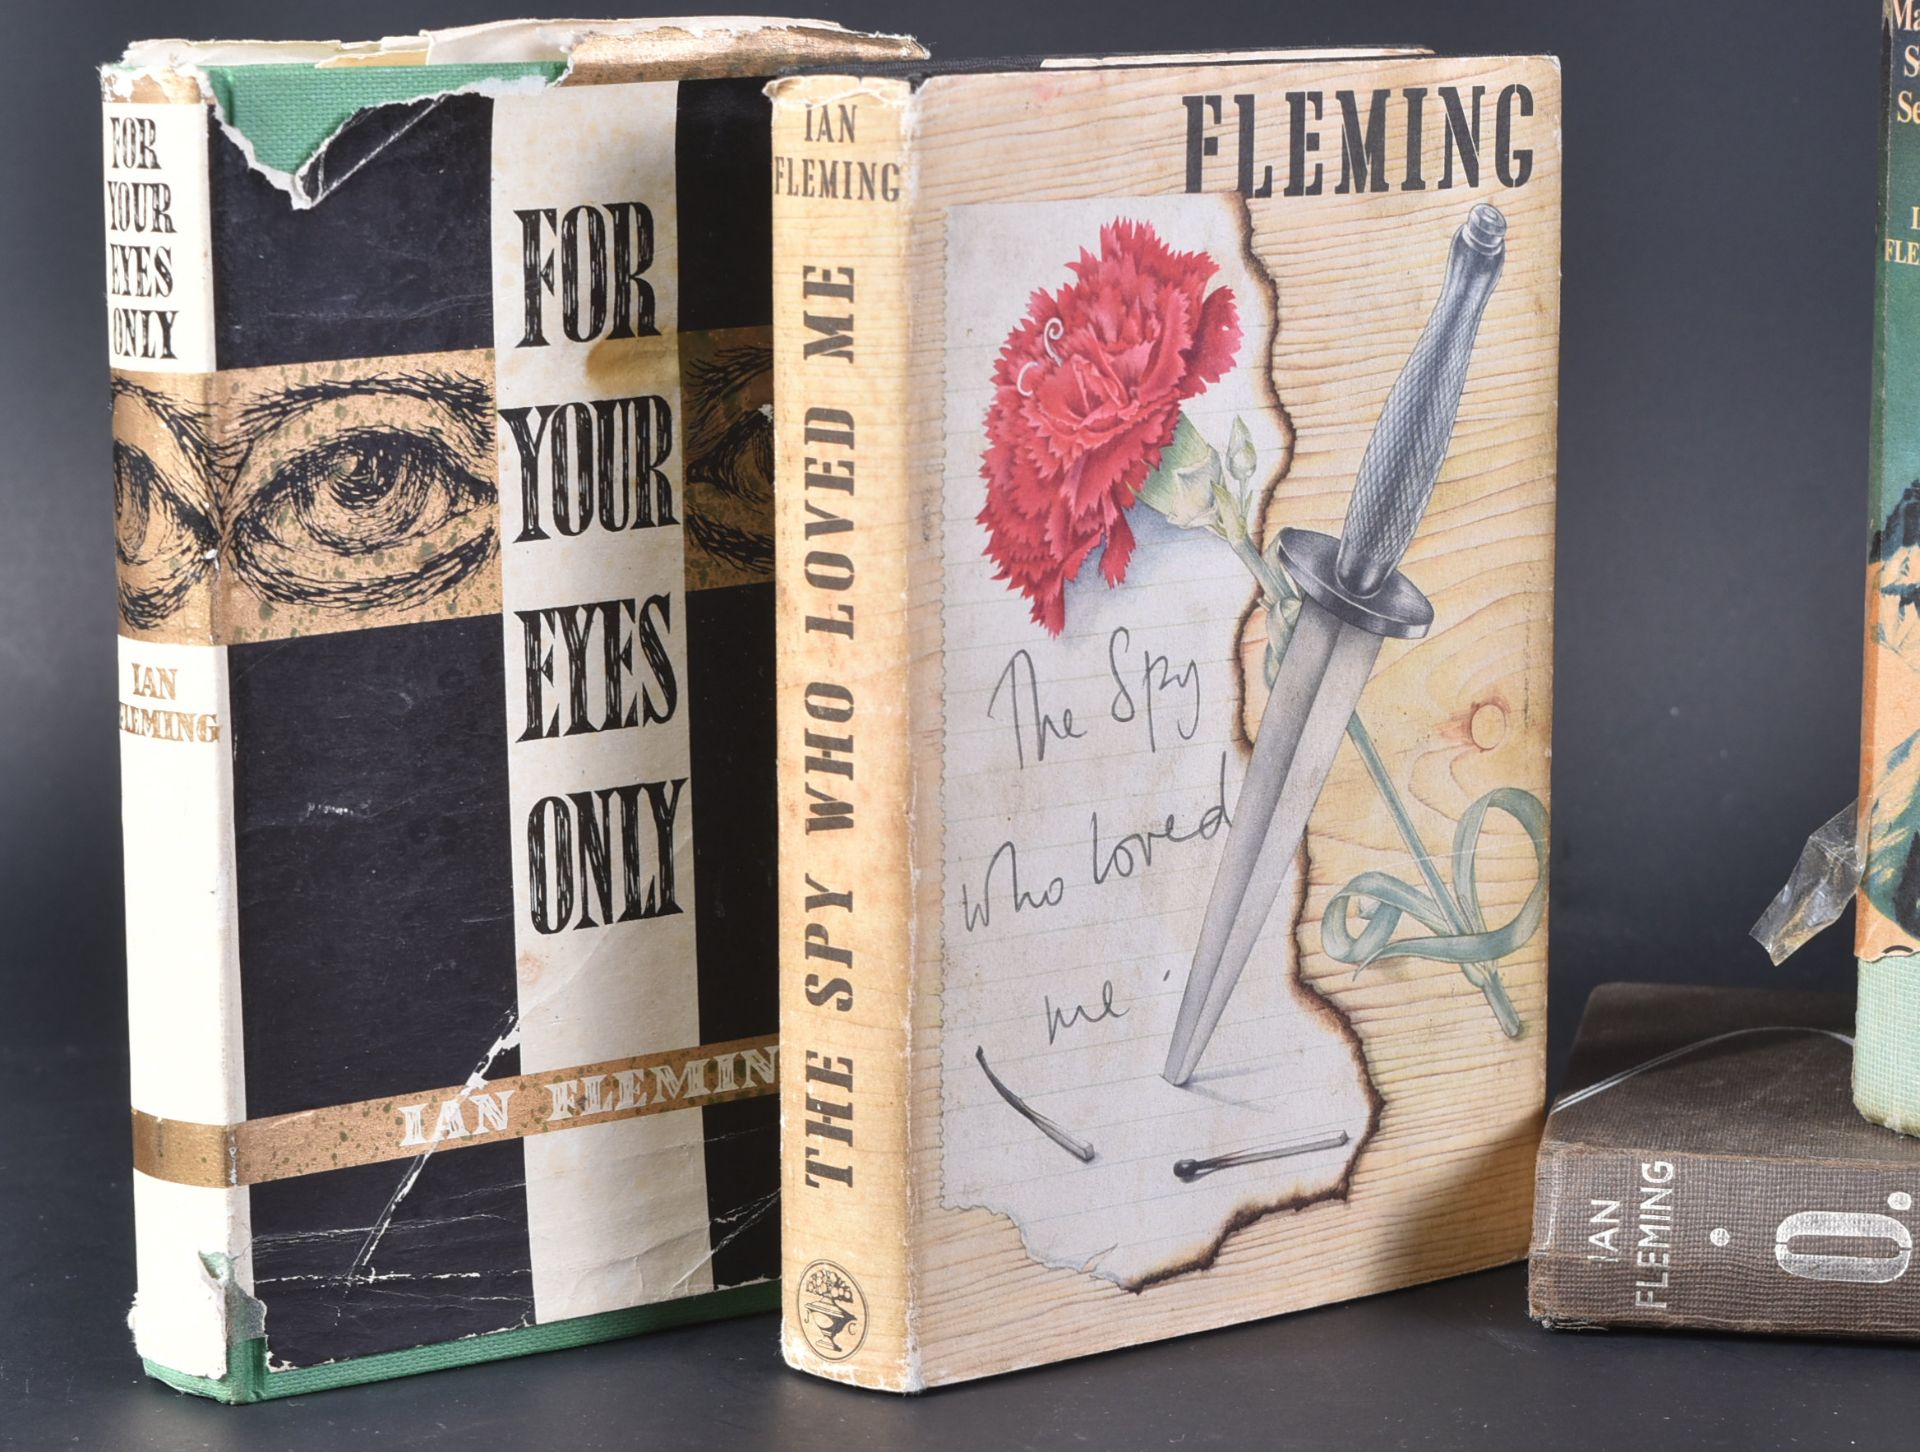 JAMES BOND - BOOKS - IAN FLEMING - COLLECTION OF FIRST EDITIONS - Image 2 of 9